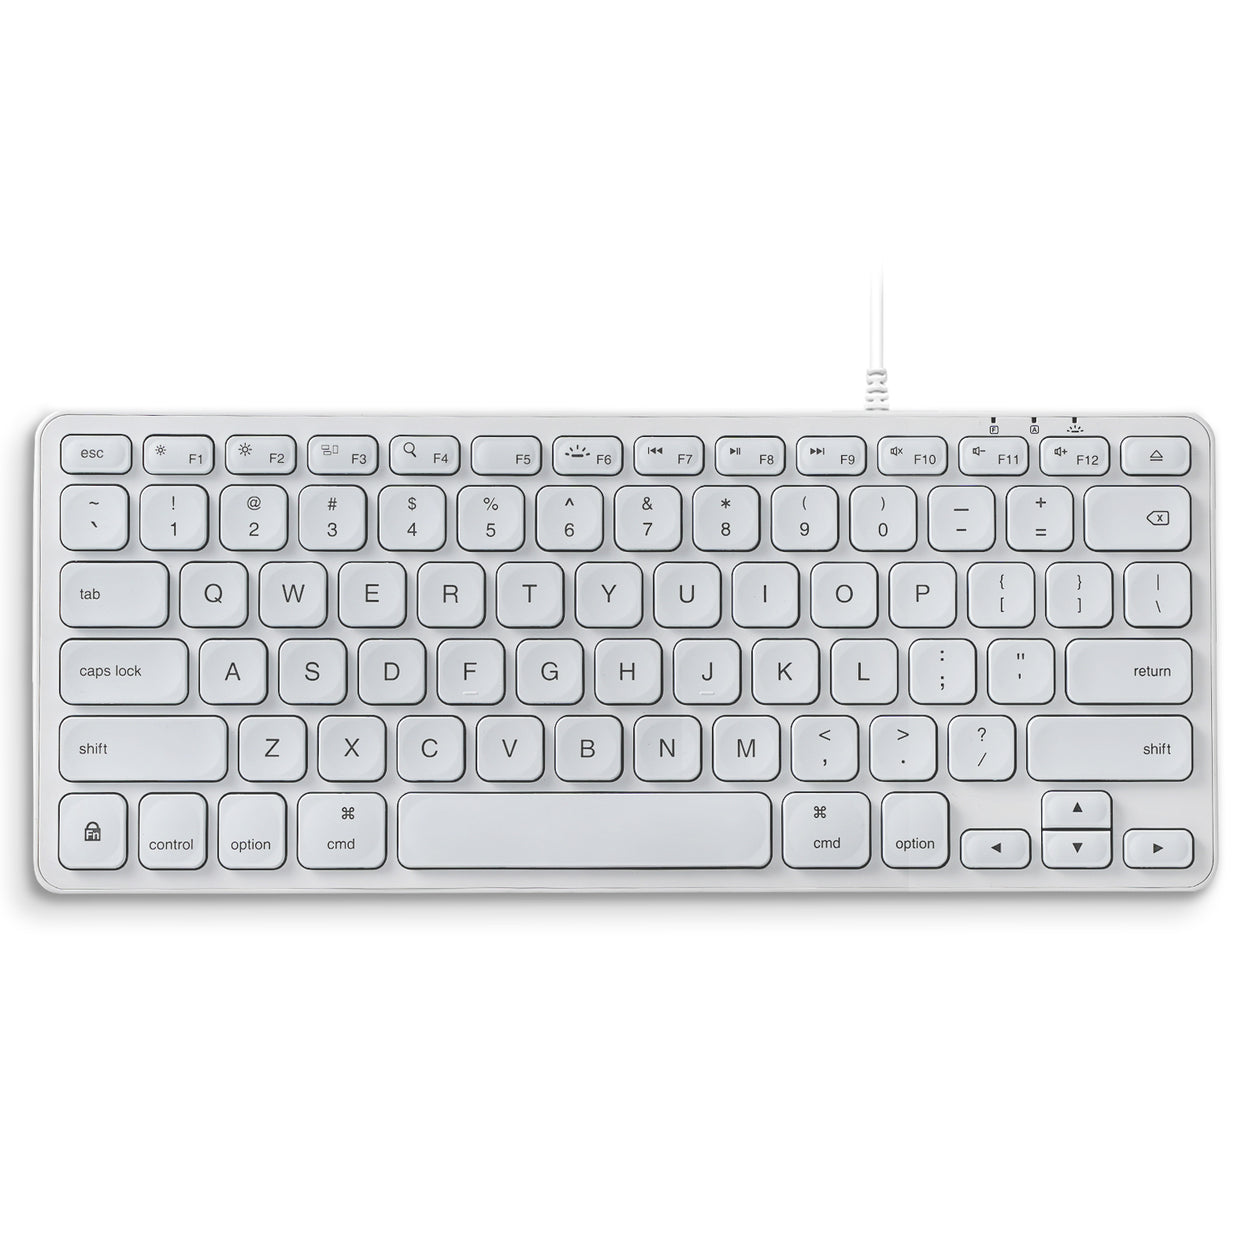 This Slimline Keyboard Is The Ideal Partner For Your Apple Mac